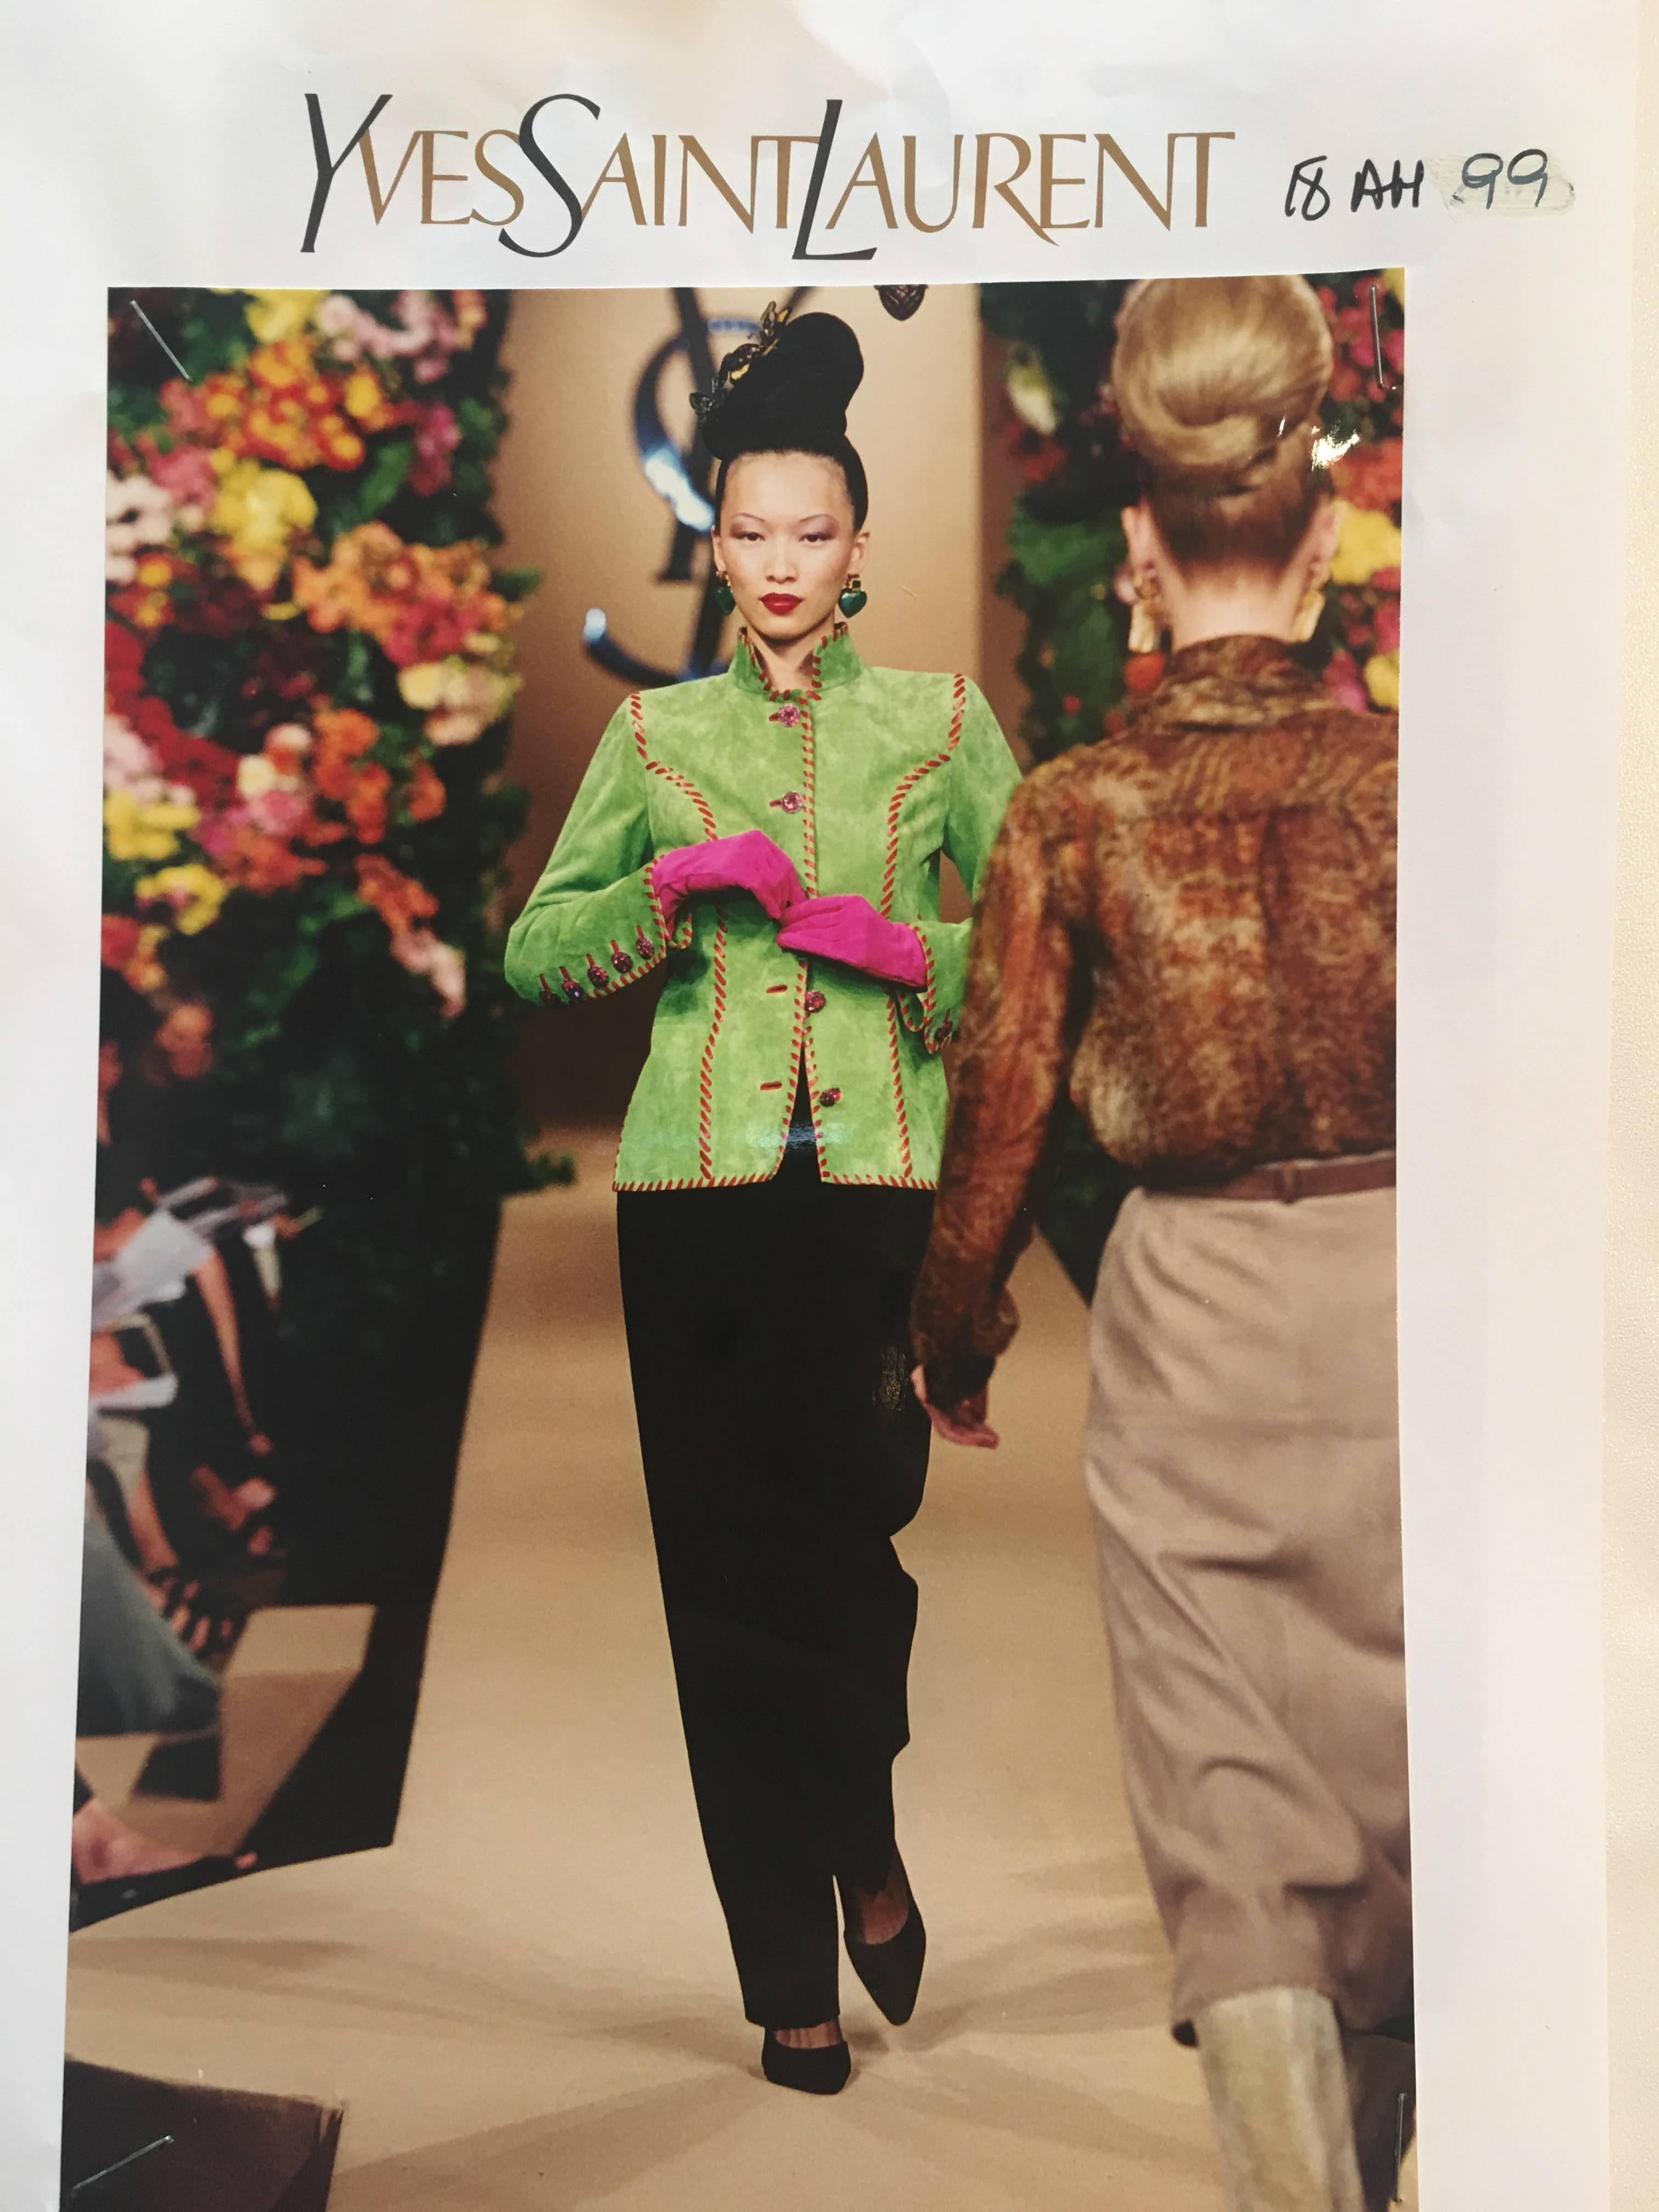 Yves Saint Laurent AW 1999 Haute Couture Suede Jacket.  Archival runway photo included for reference.  Lime green suede body with fuchsia pink whipstitched edges and rhinestone jewelled buttons.  Lined in bright fuchsia satin.  Approximate size FR